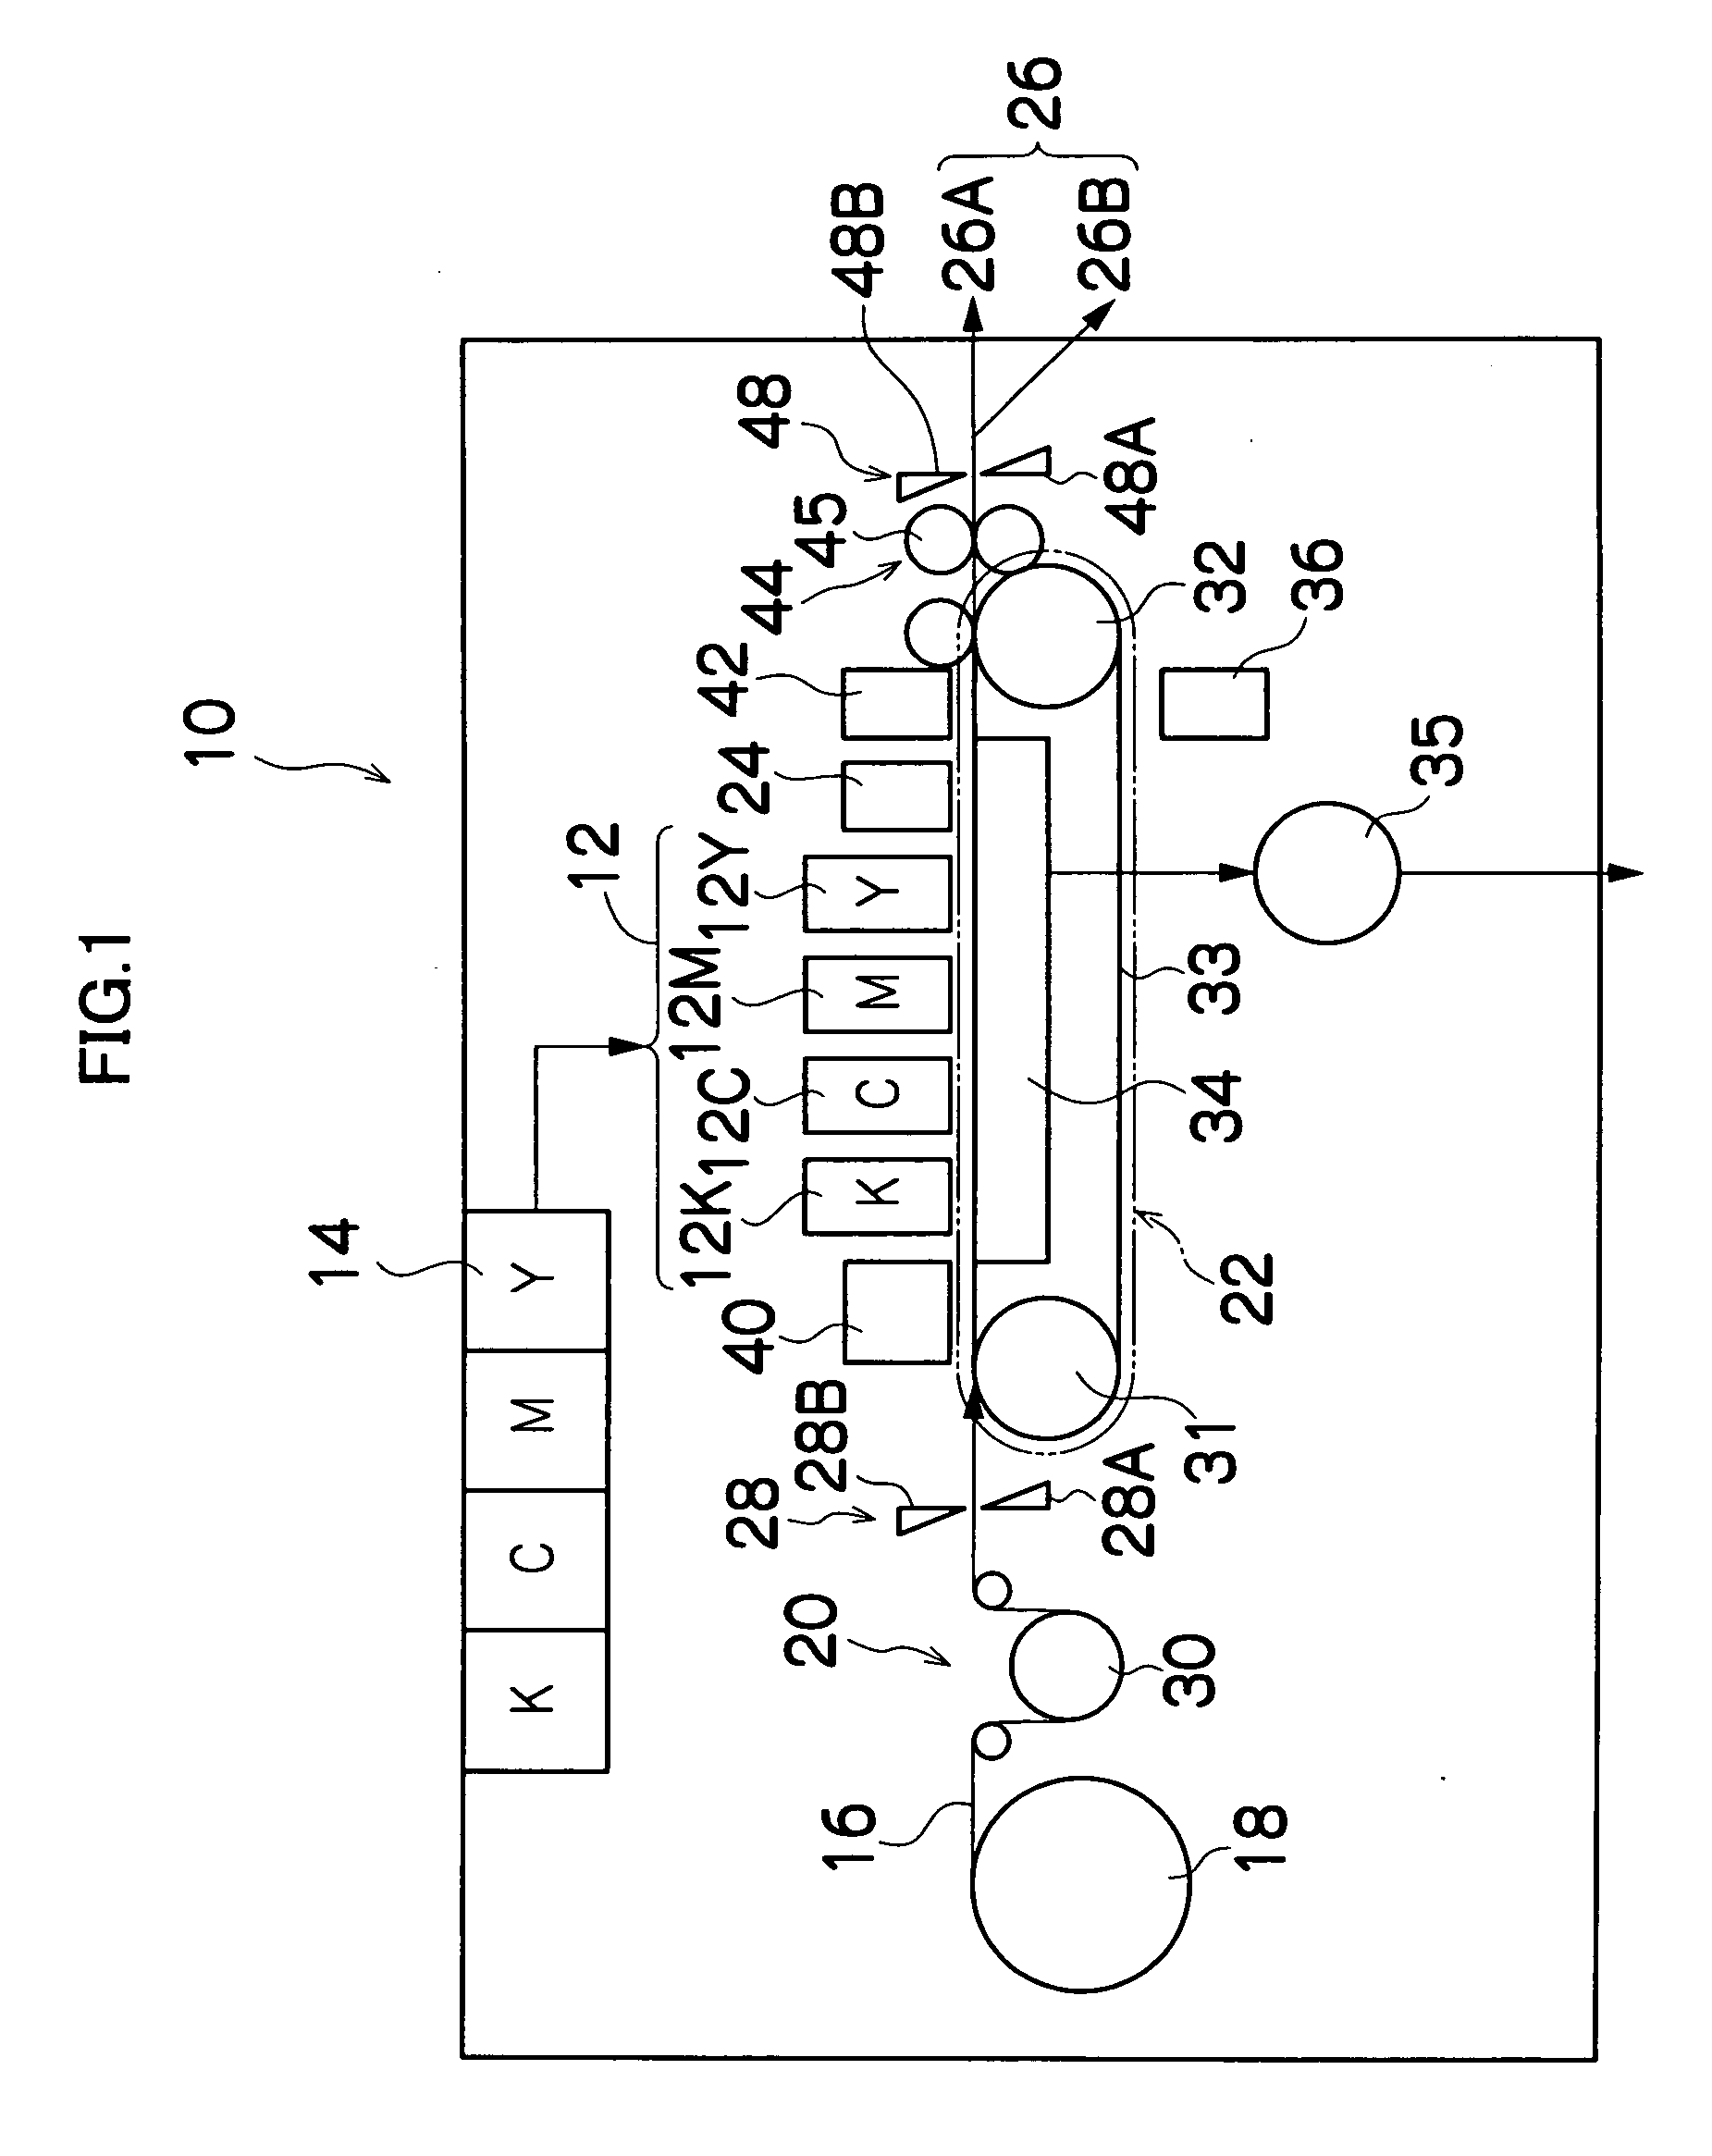 Liquid droplet ejection method and liquid droplet ejection apparatus